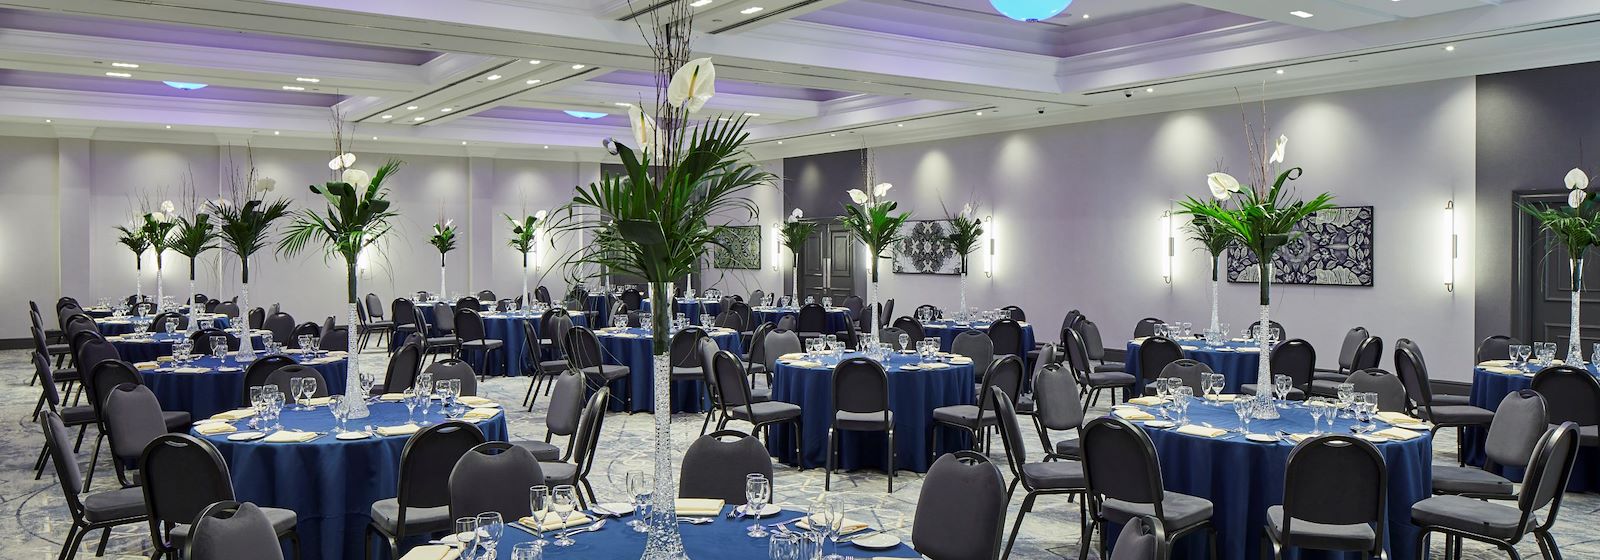 Event Spaces at Cardiff Marriott Hotel